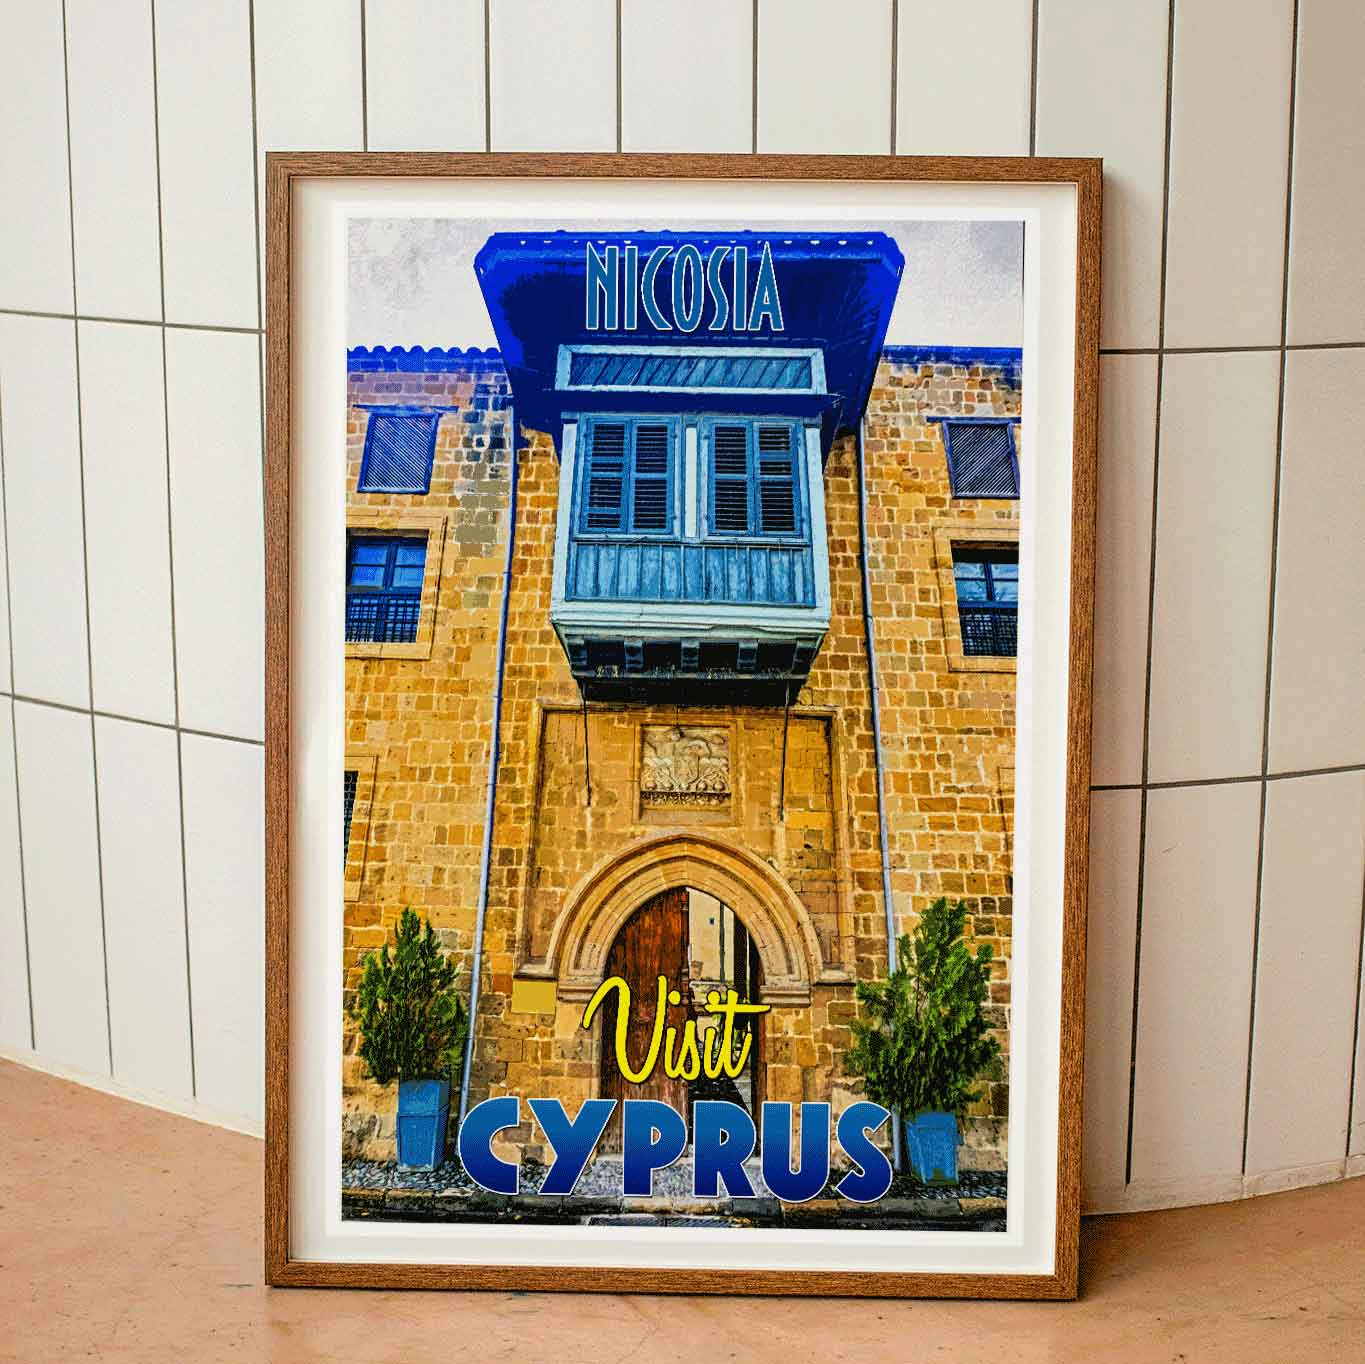 Vintage travel poster print featuring the scenic beauty of Nicosia. The travel poster is in a wooden frame.